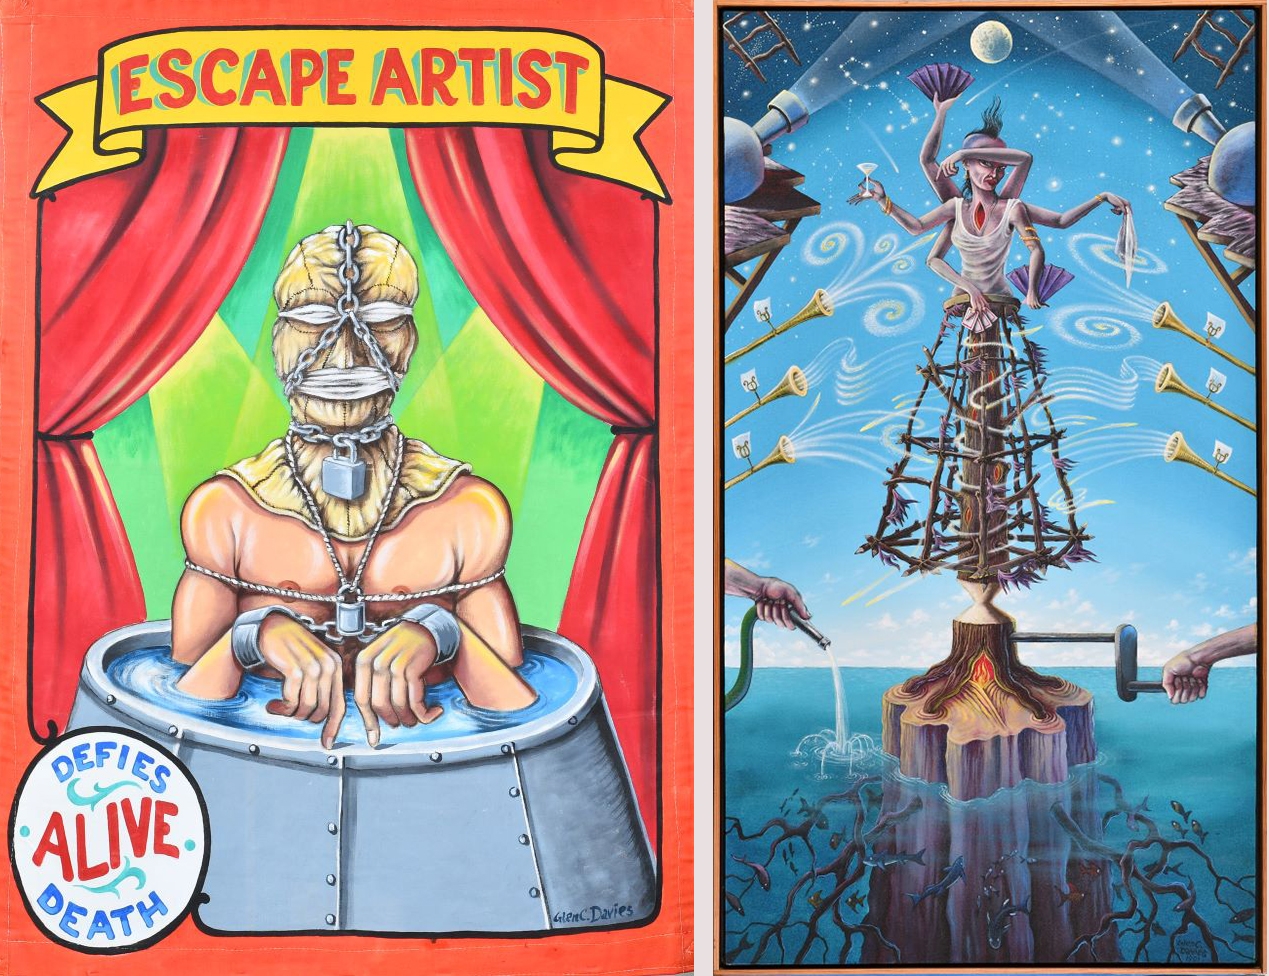 (left) image of a man bound in chains in a tank of water. the words escape artist written above the figure. Left is a woman with a tree trunk body standing in a body of water. She holds fans, glasses, and playing cards in her six arms.